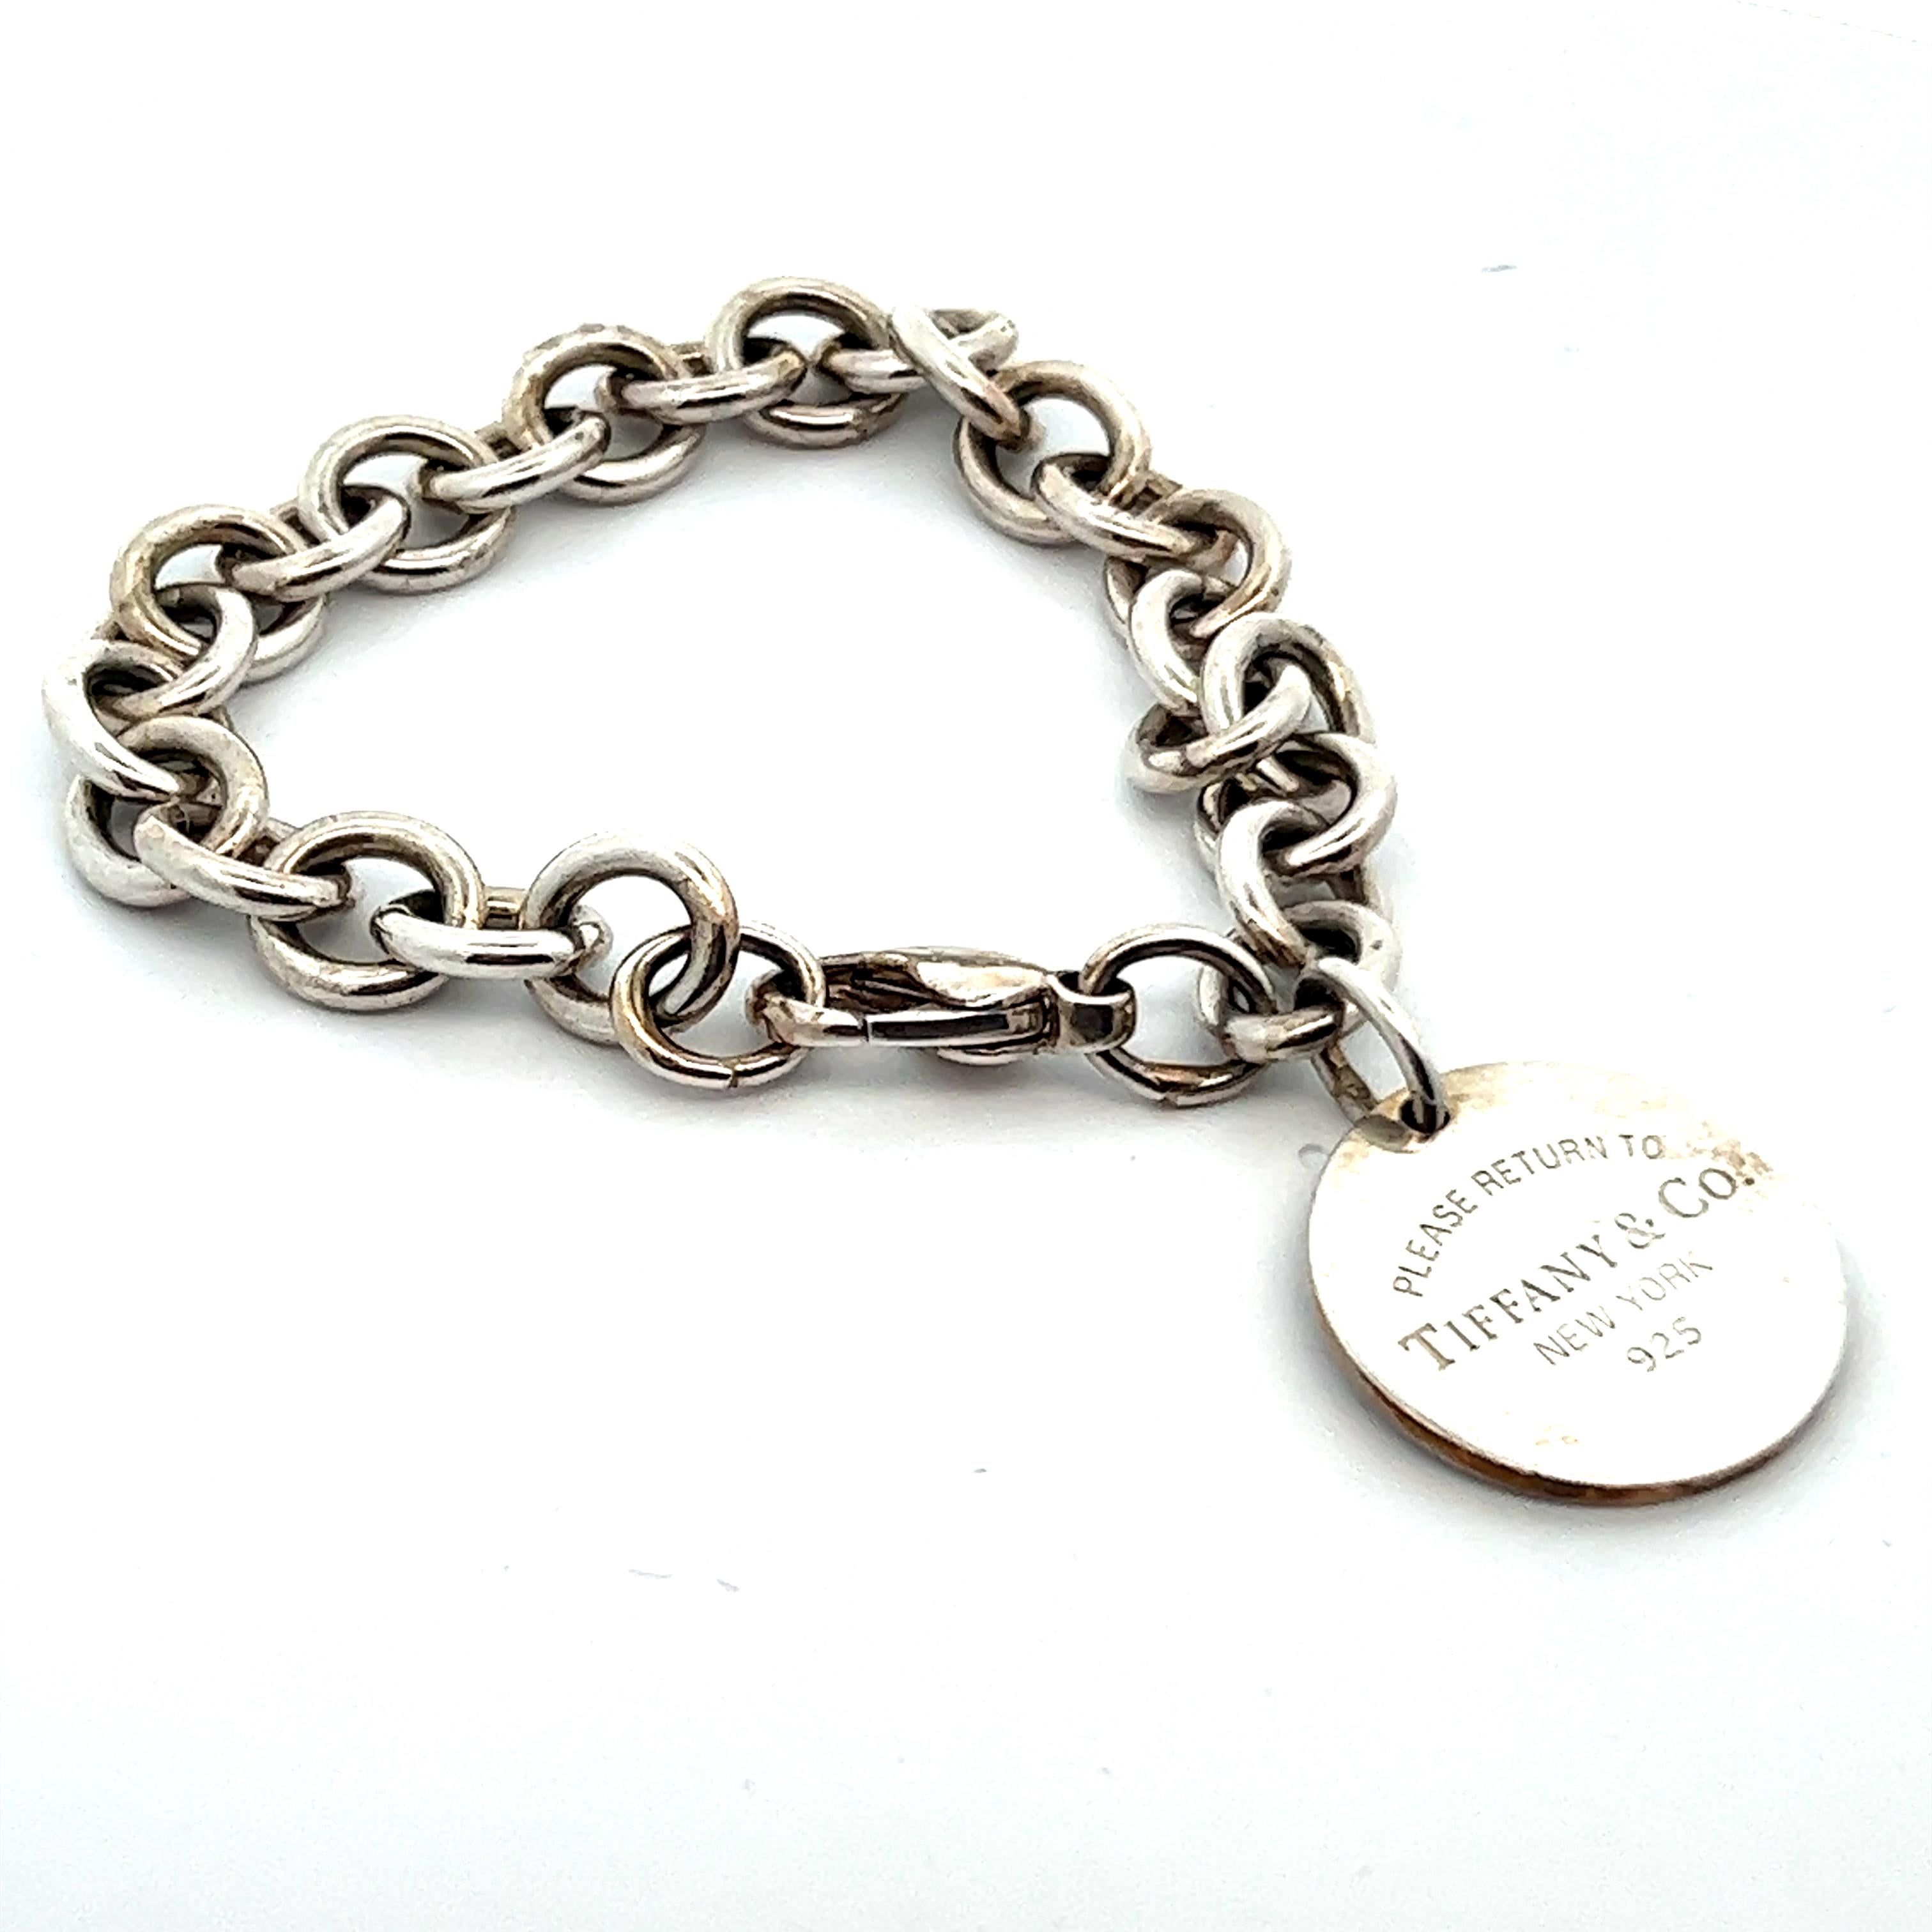 Tiffany Please Return to Tiffany Tag 925 Sterling Silver Chunky Link Bracelet  In Excellent Condition For Sale In Lexington, KY